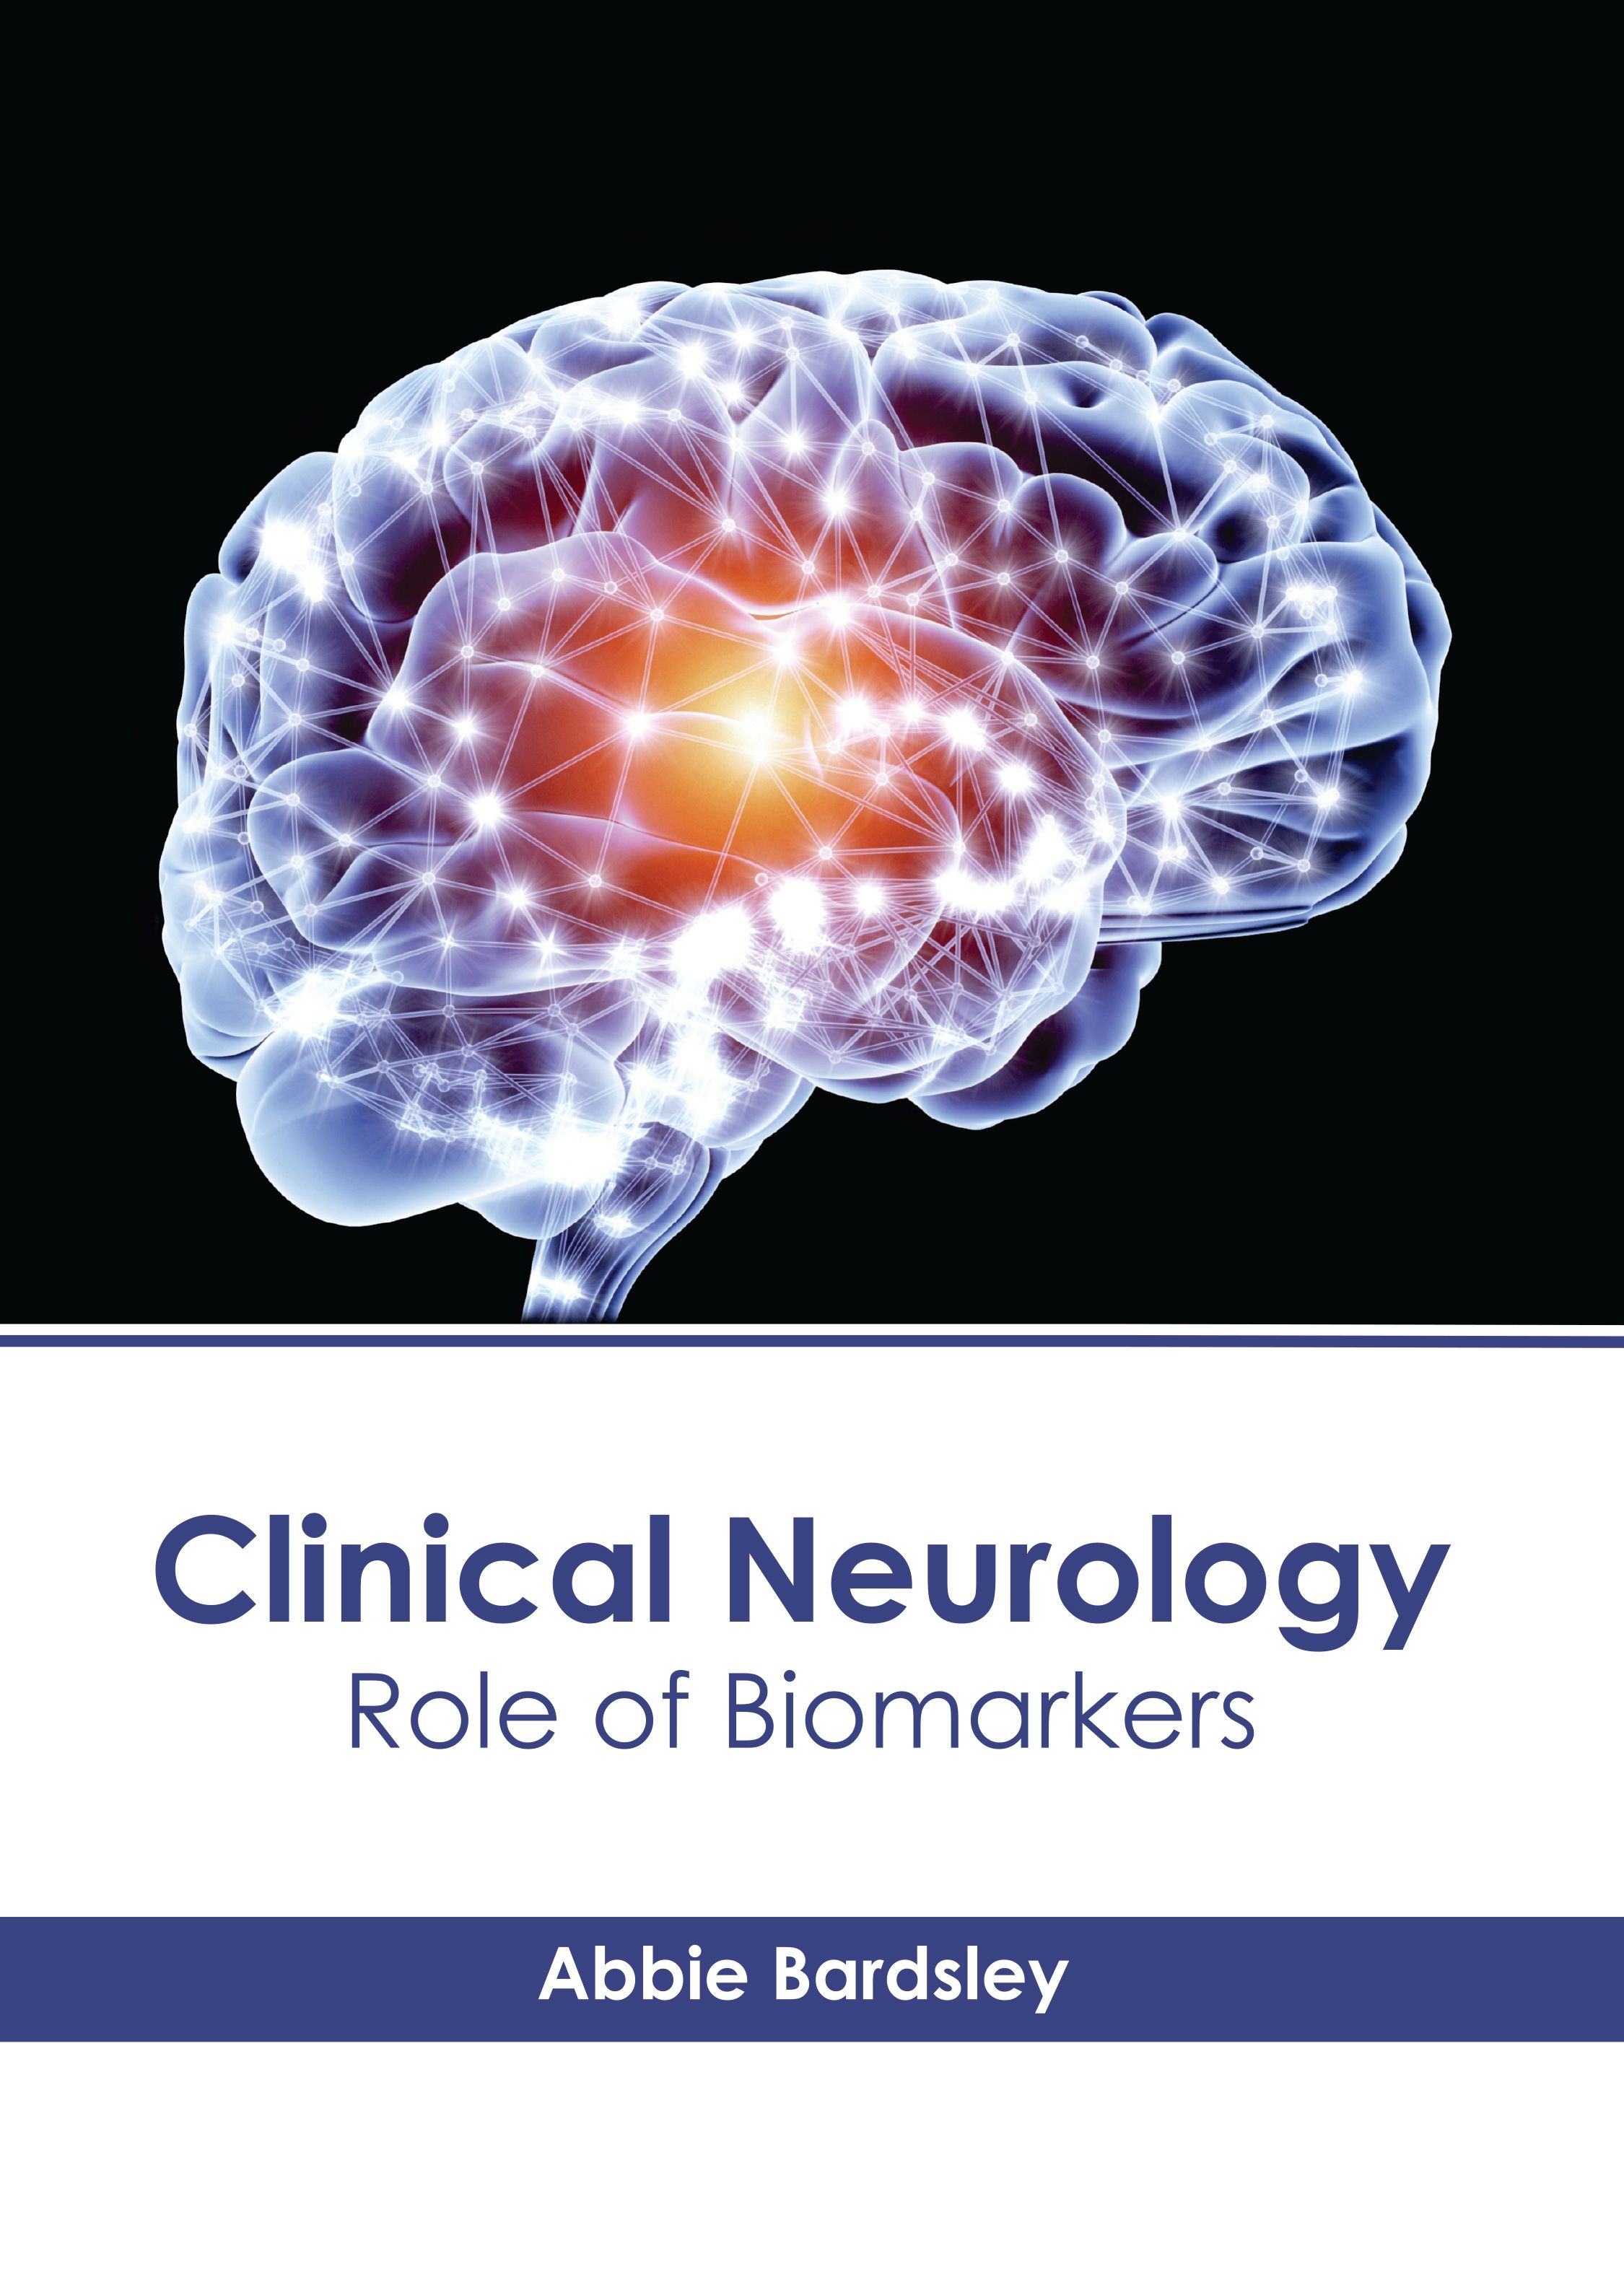 CLINICAL NEUROLOGY: ROLE OF BIOMARKERS